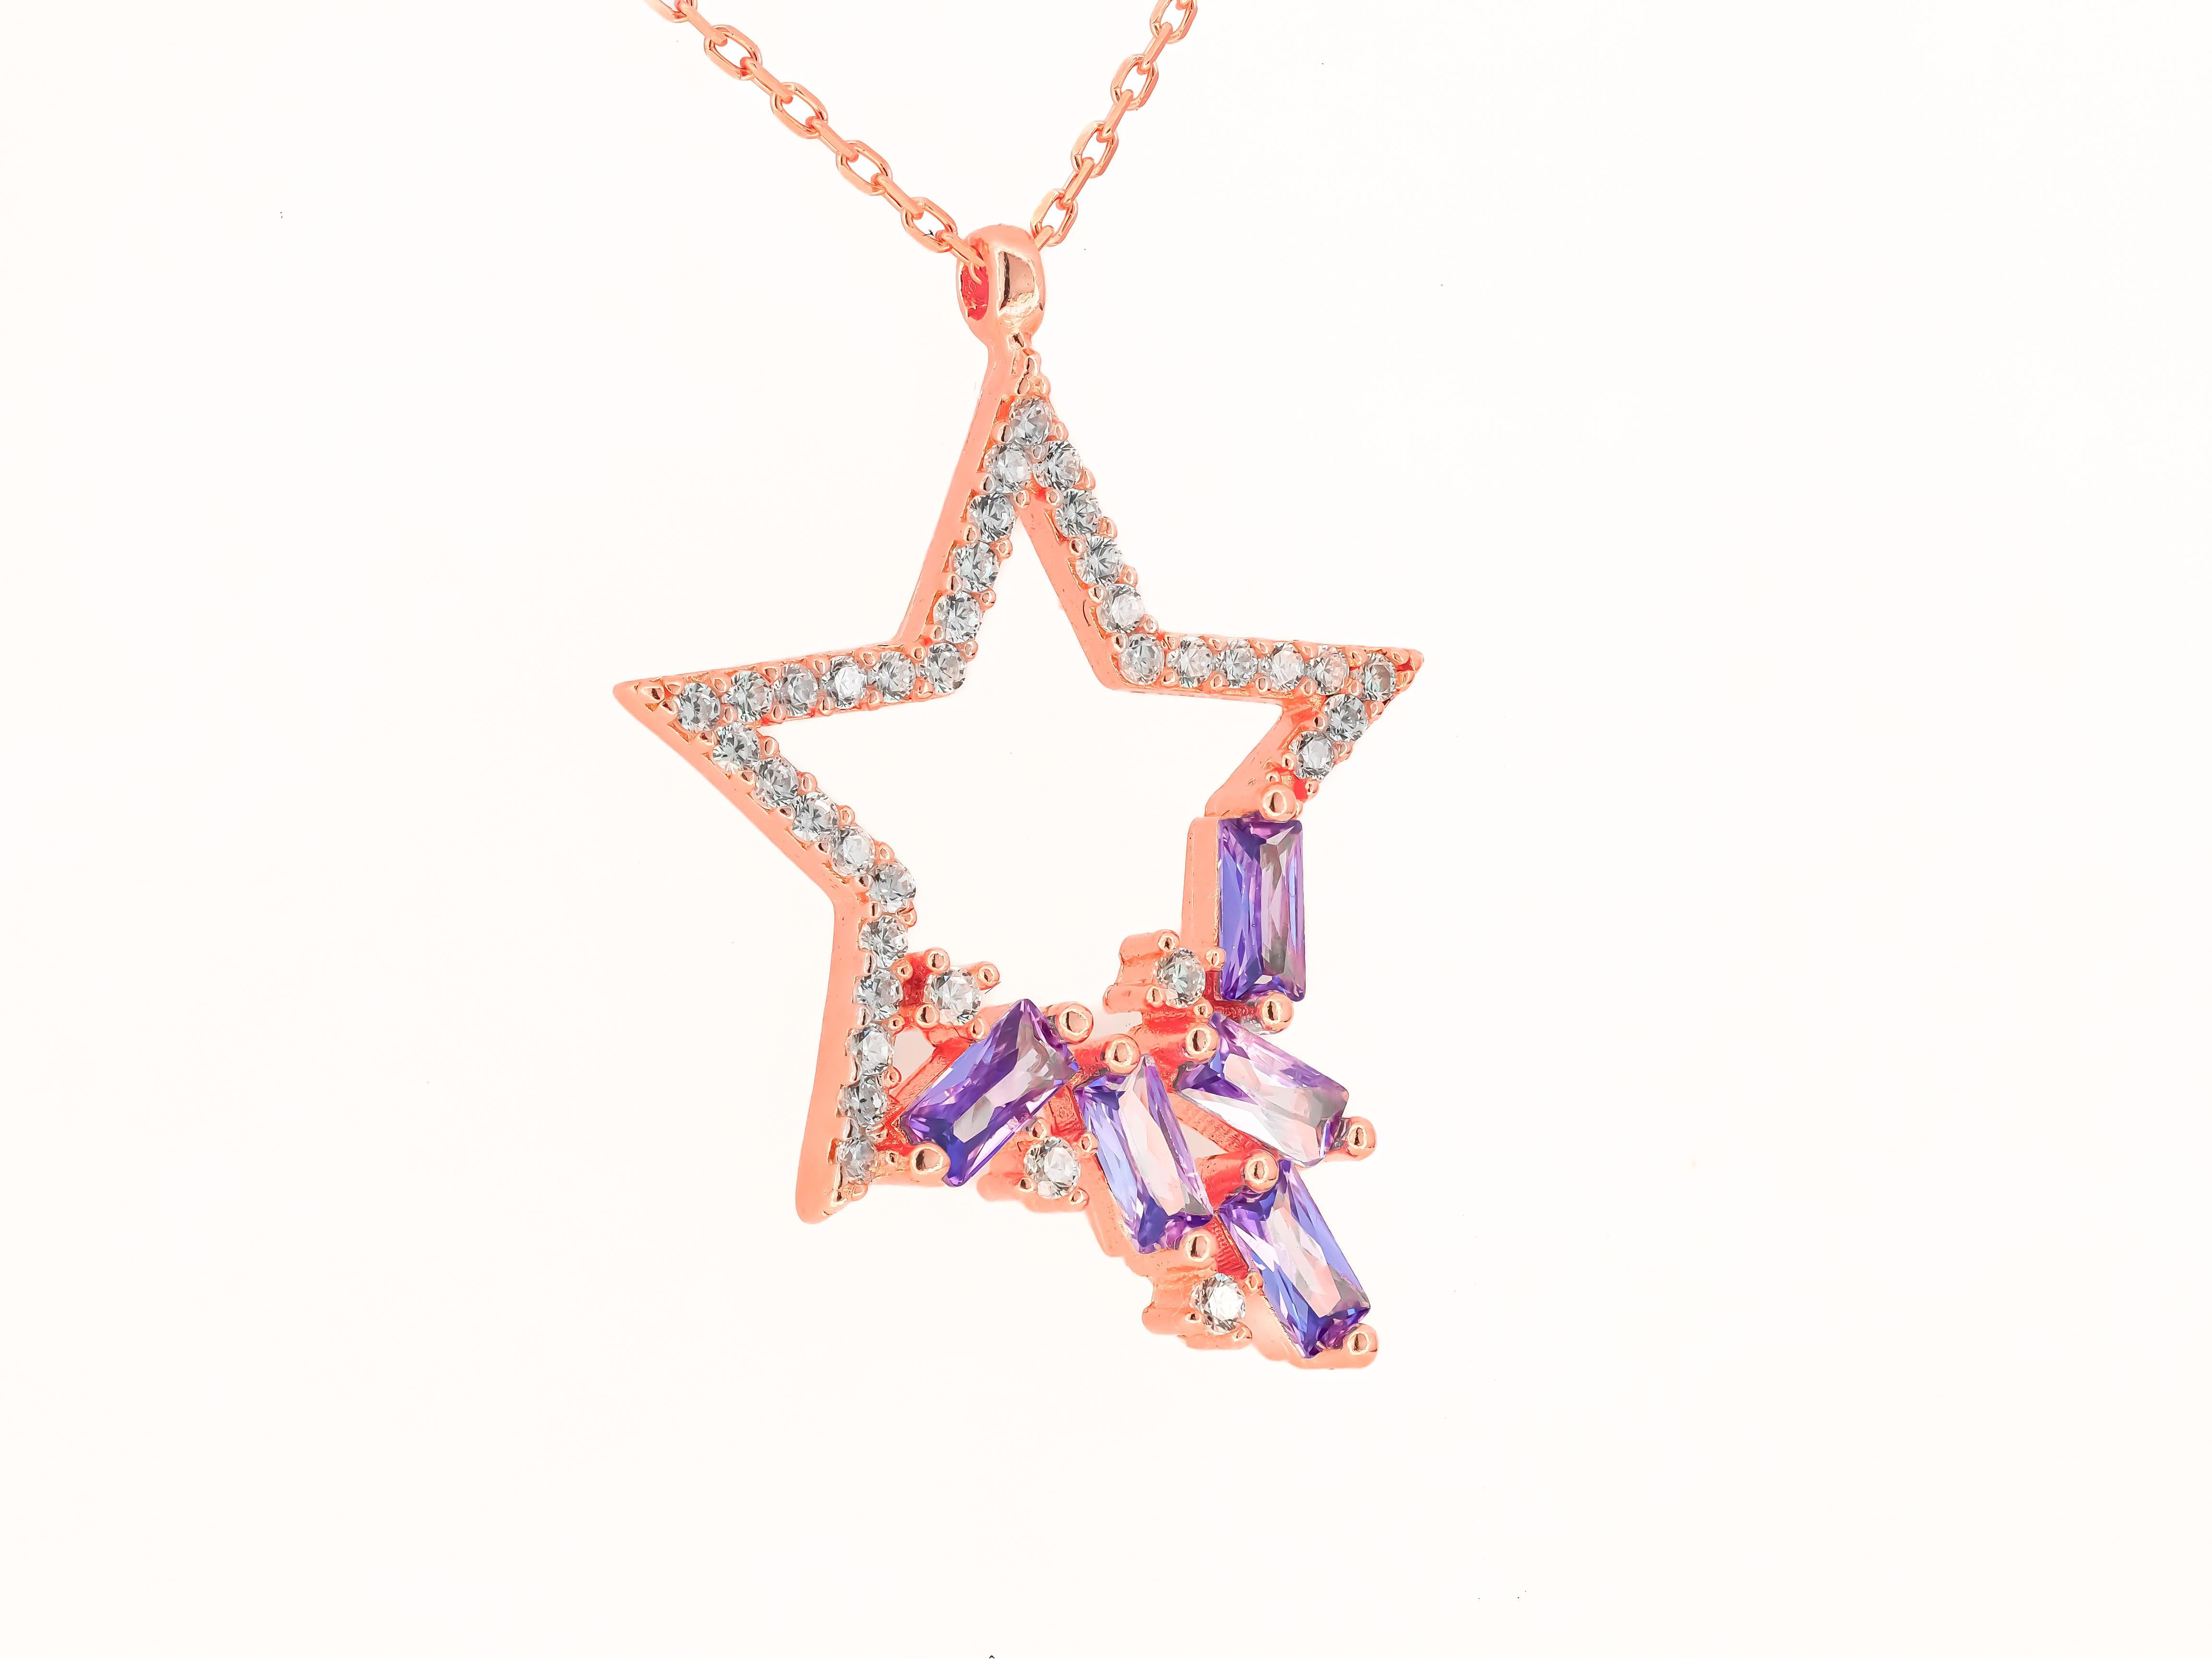 Modern Star pendant necklace with diamonds and amethysts in 14k gold.  For Sale